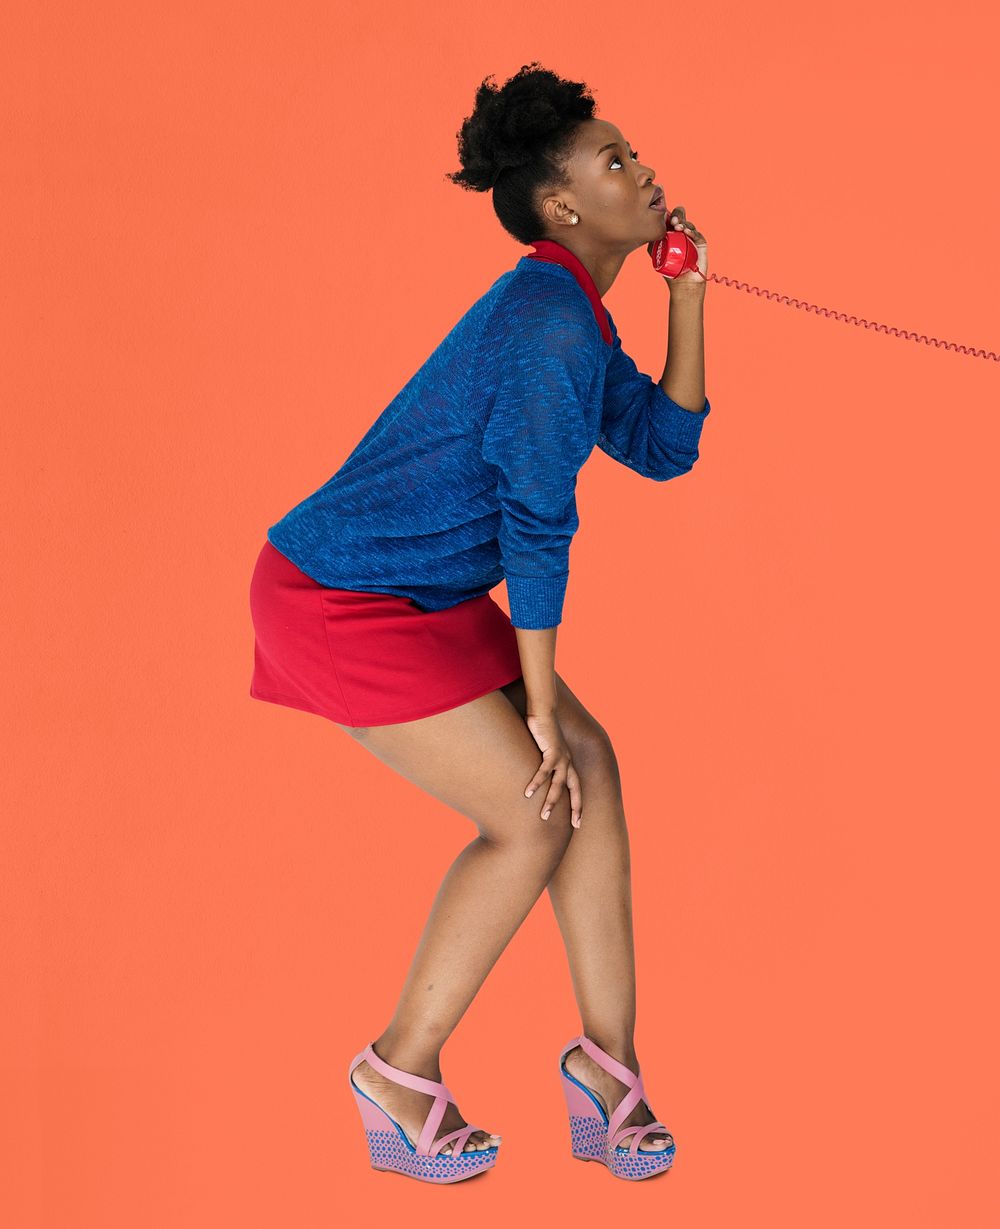 Studio portrait of a young woman bending her knees while talking on the phone